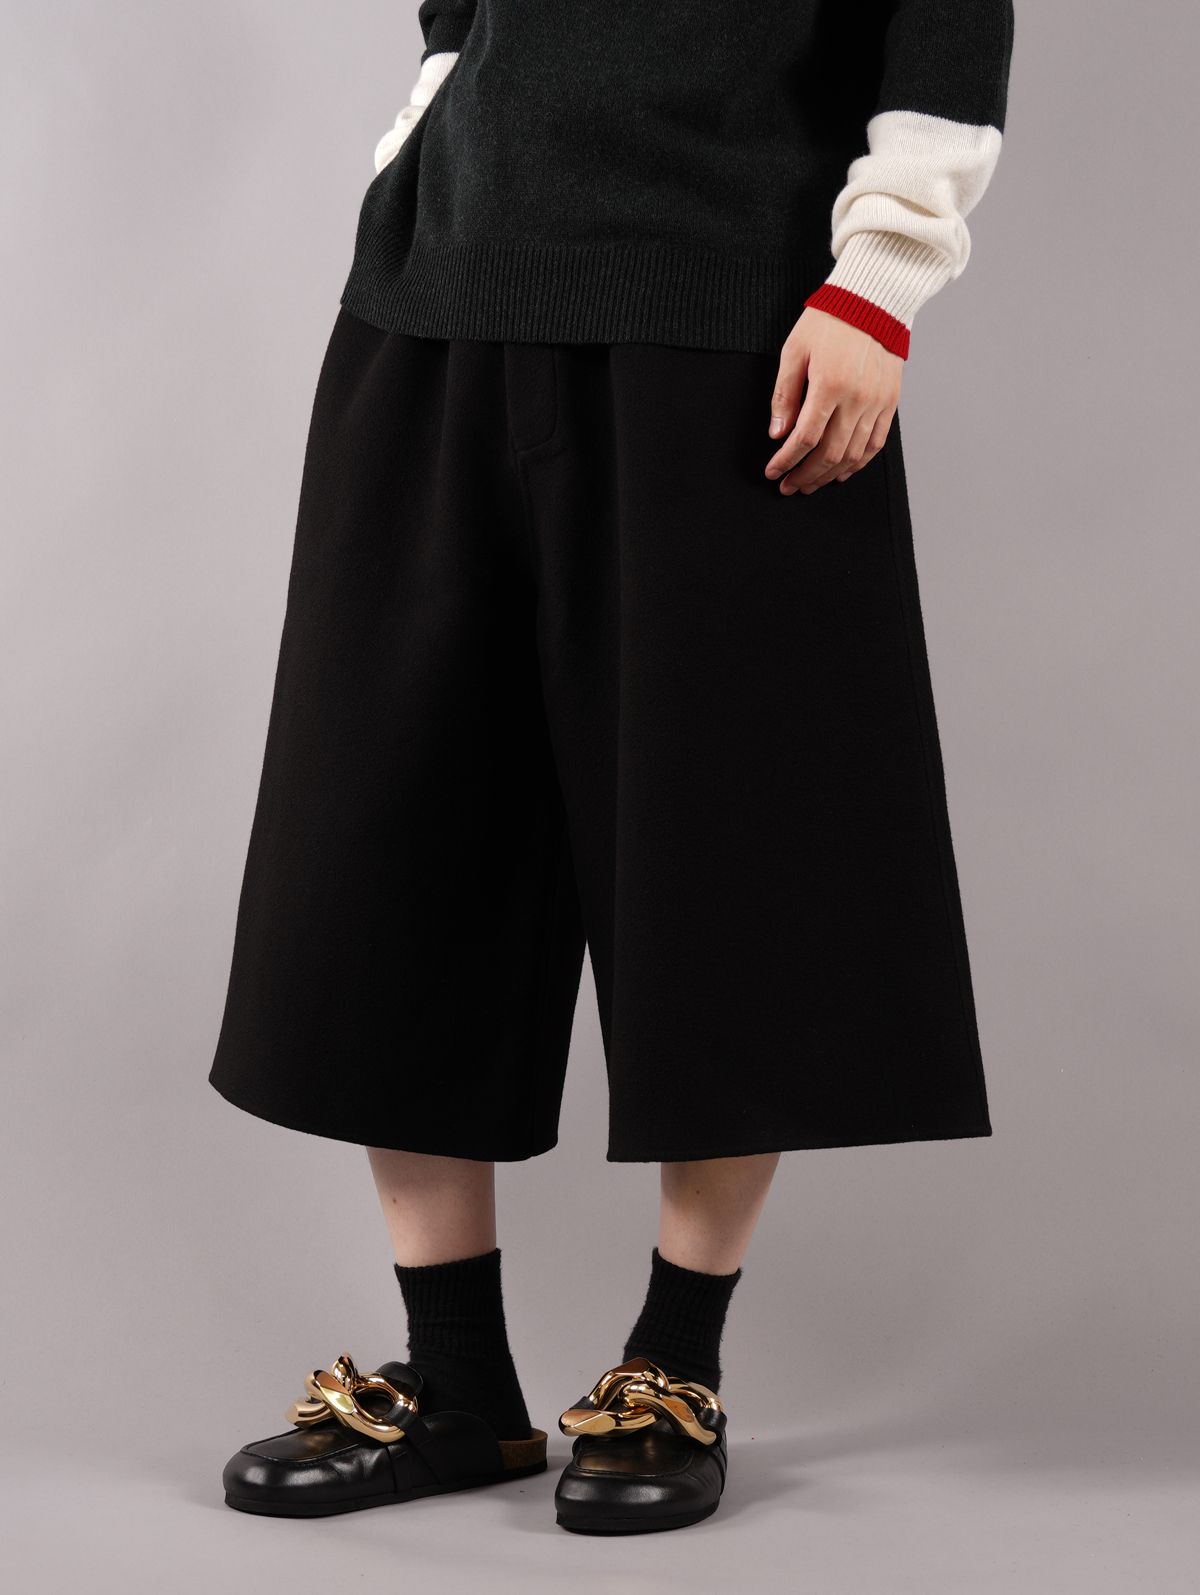 JW ANDERSON - ラスト1点 / OVERSIZE DOUBLE FACE WOOL SHORTS